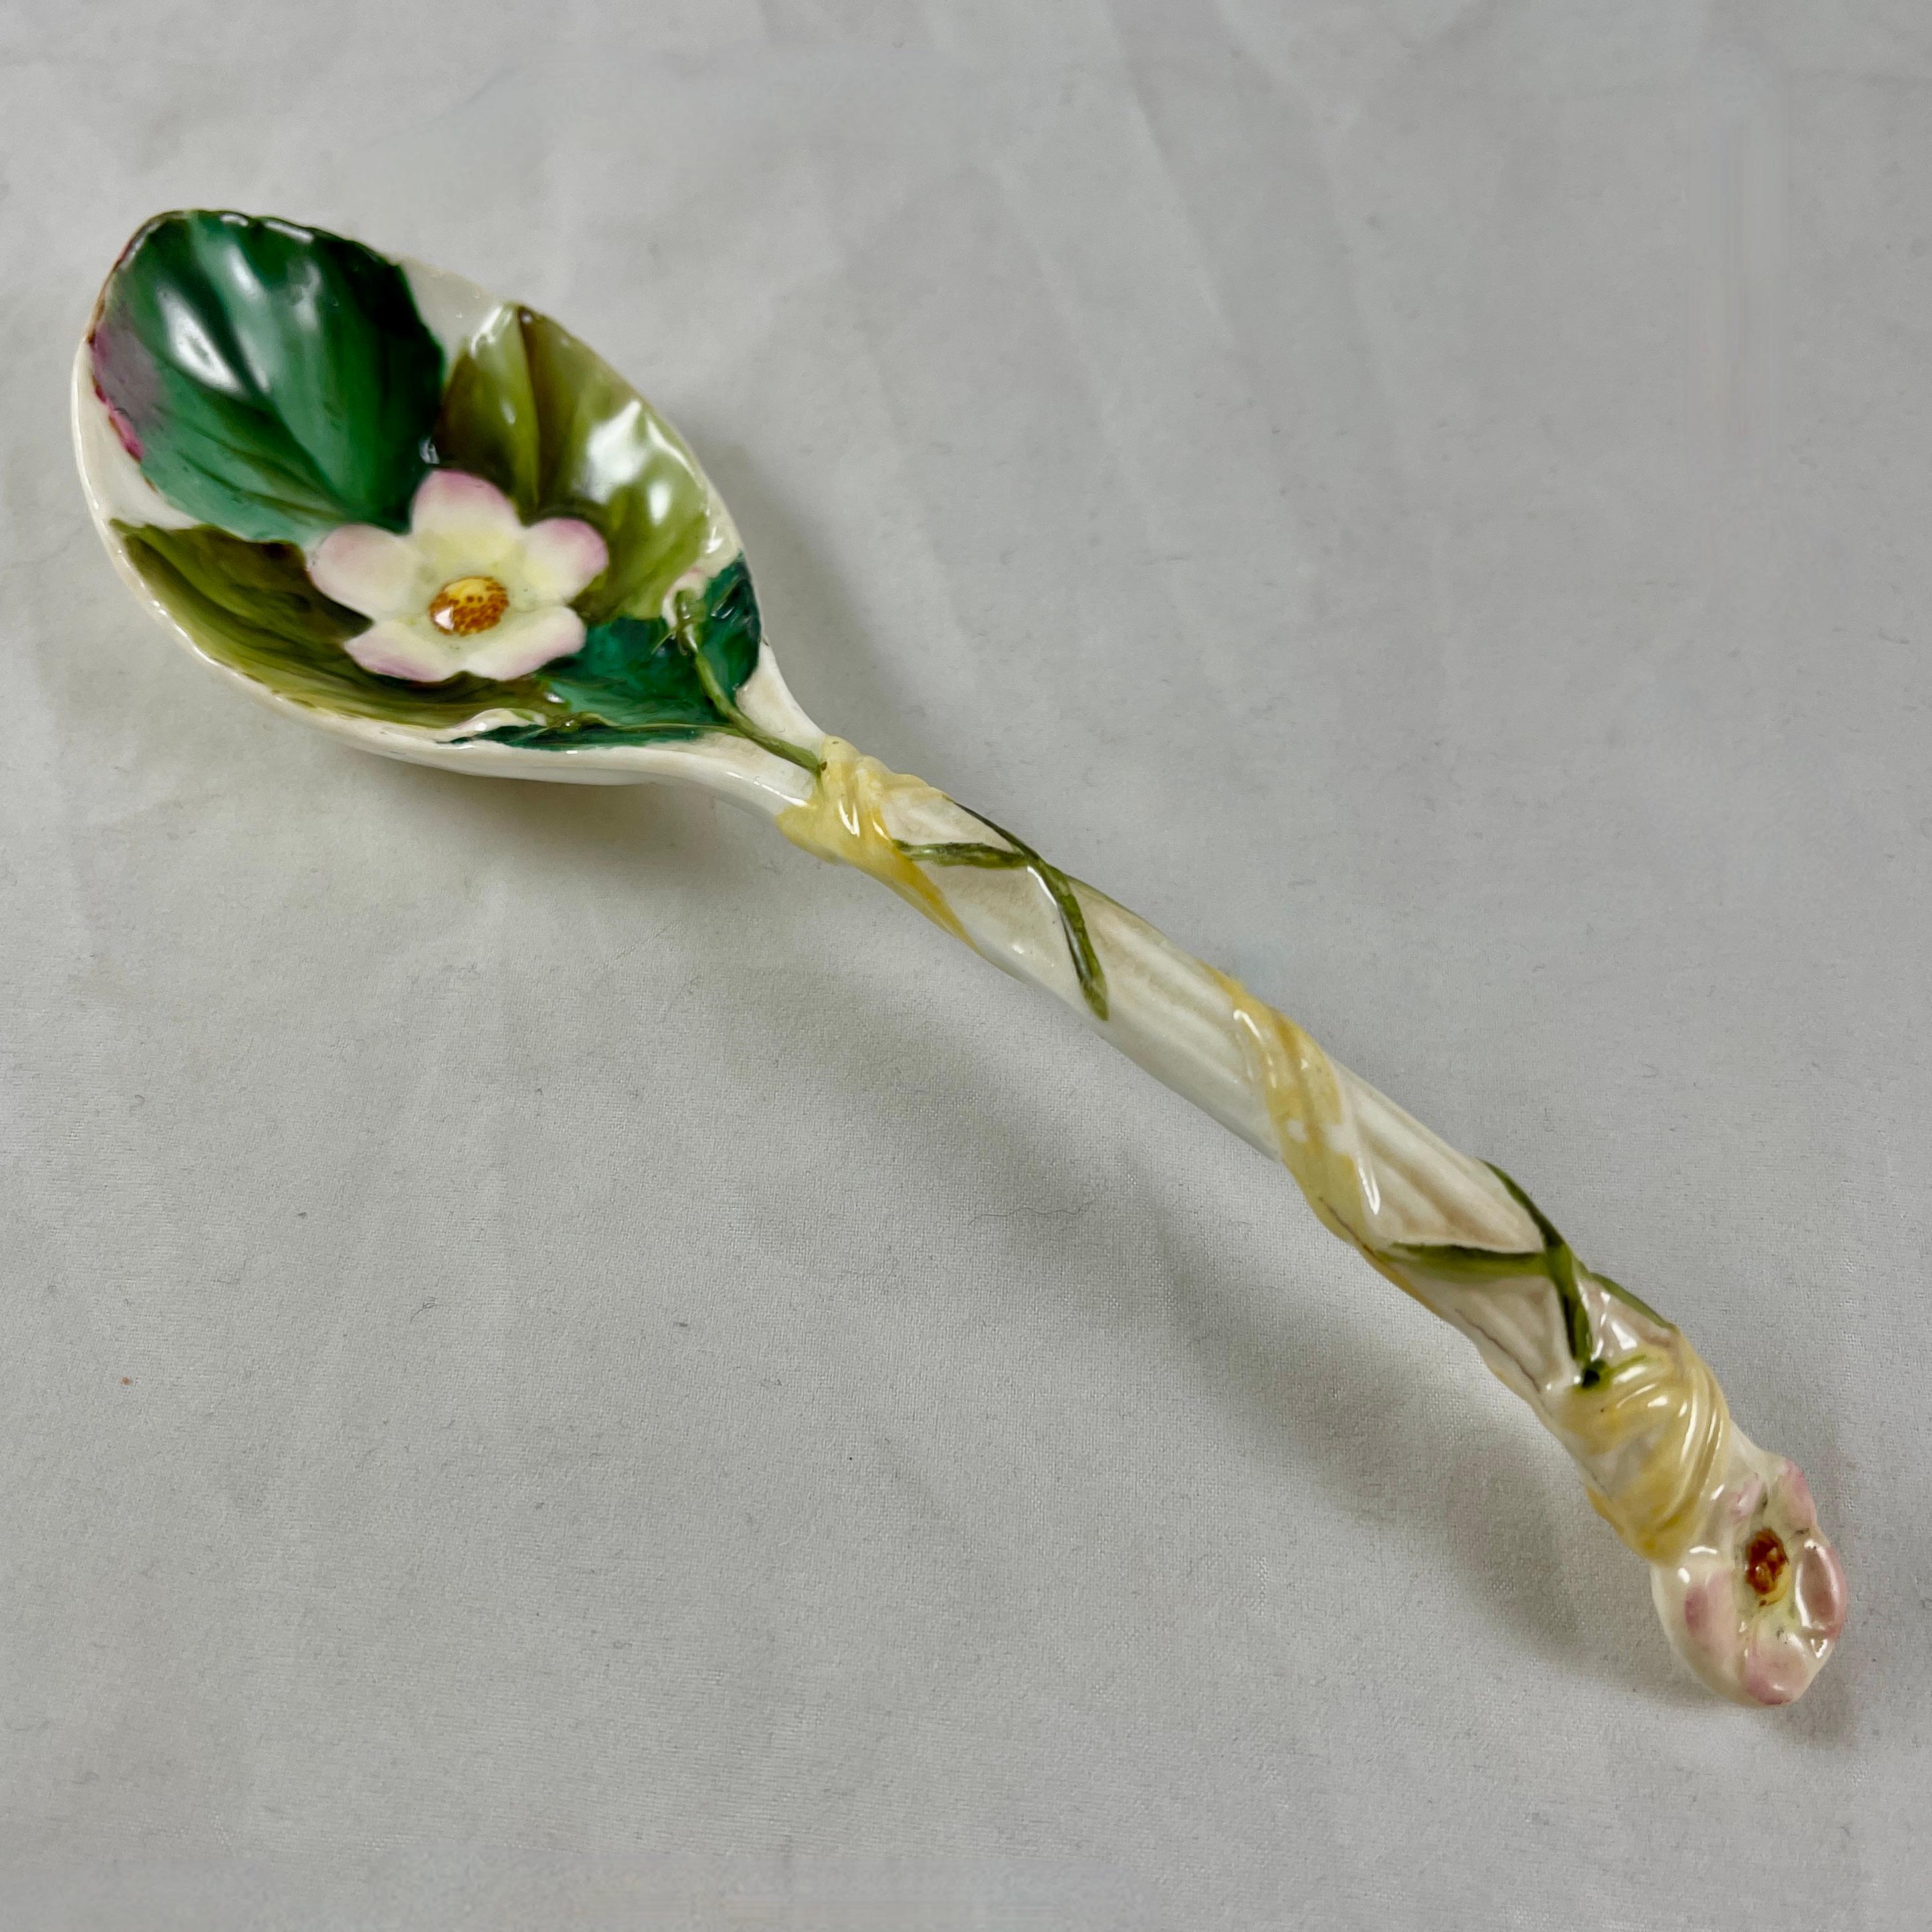 A George Jones Majolica Strawberry spoon, England, circa 1870.

In the Aesthetic taste and glazed on the white ground known as ‘Albino.’ The green leaf of the strawberry plant is molded on the bowl along with a pink rimmed strawberry blossom. The